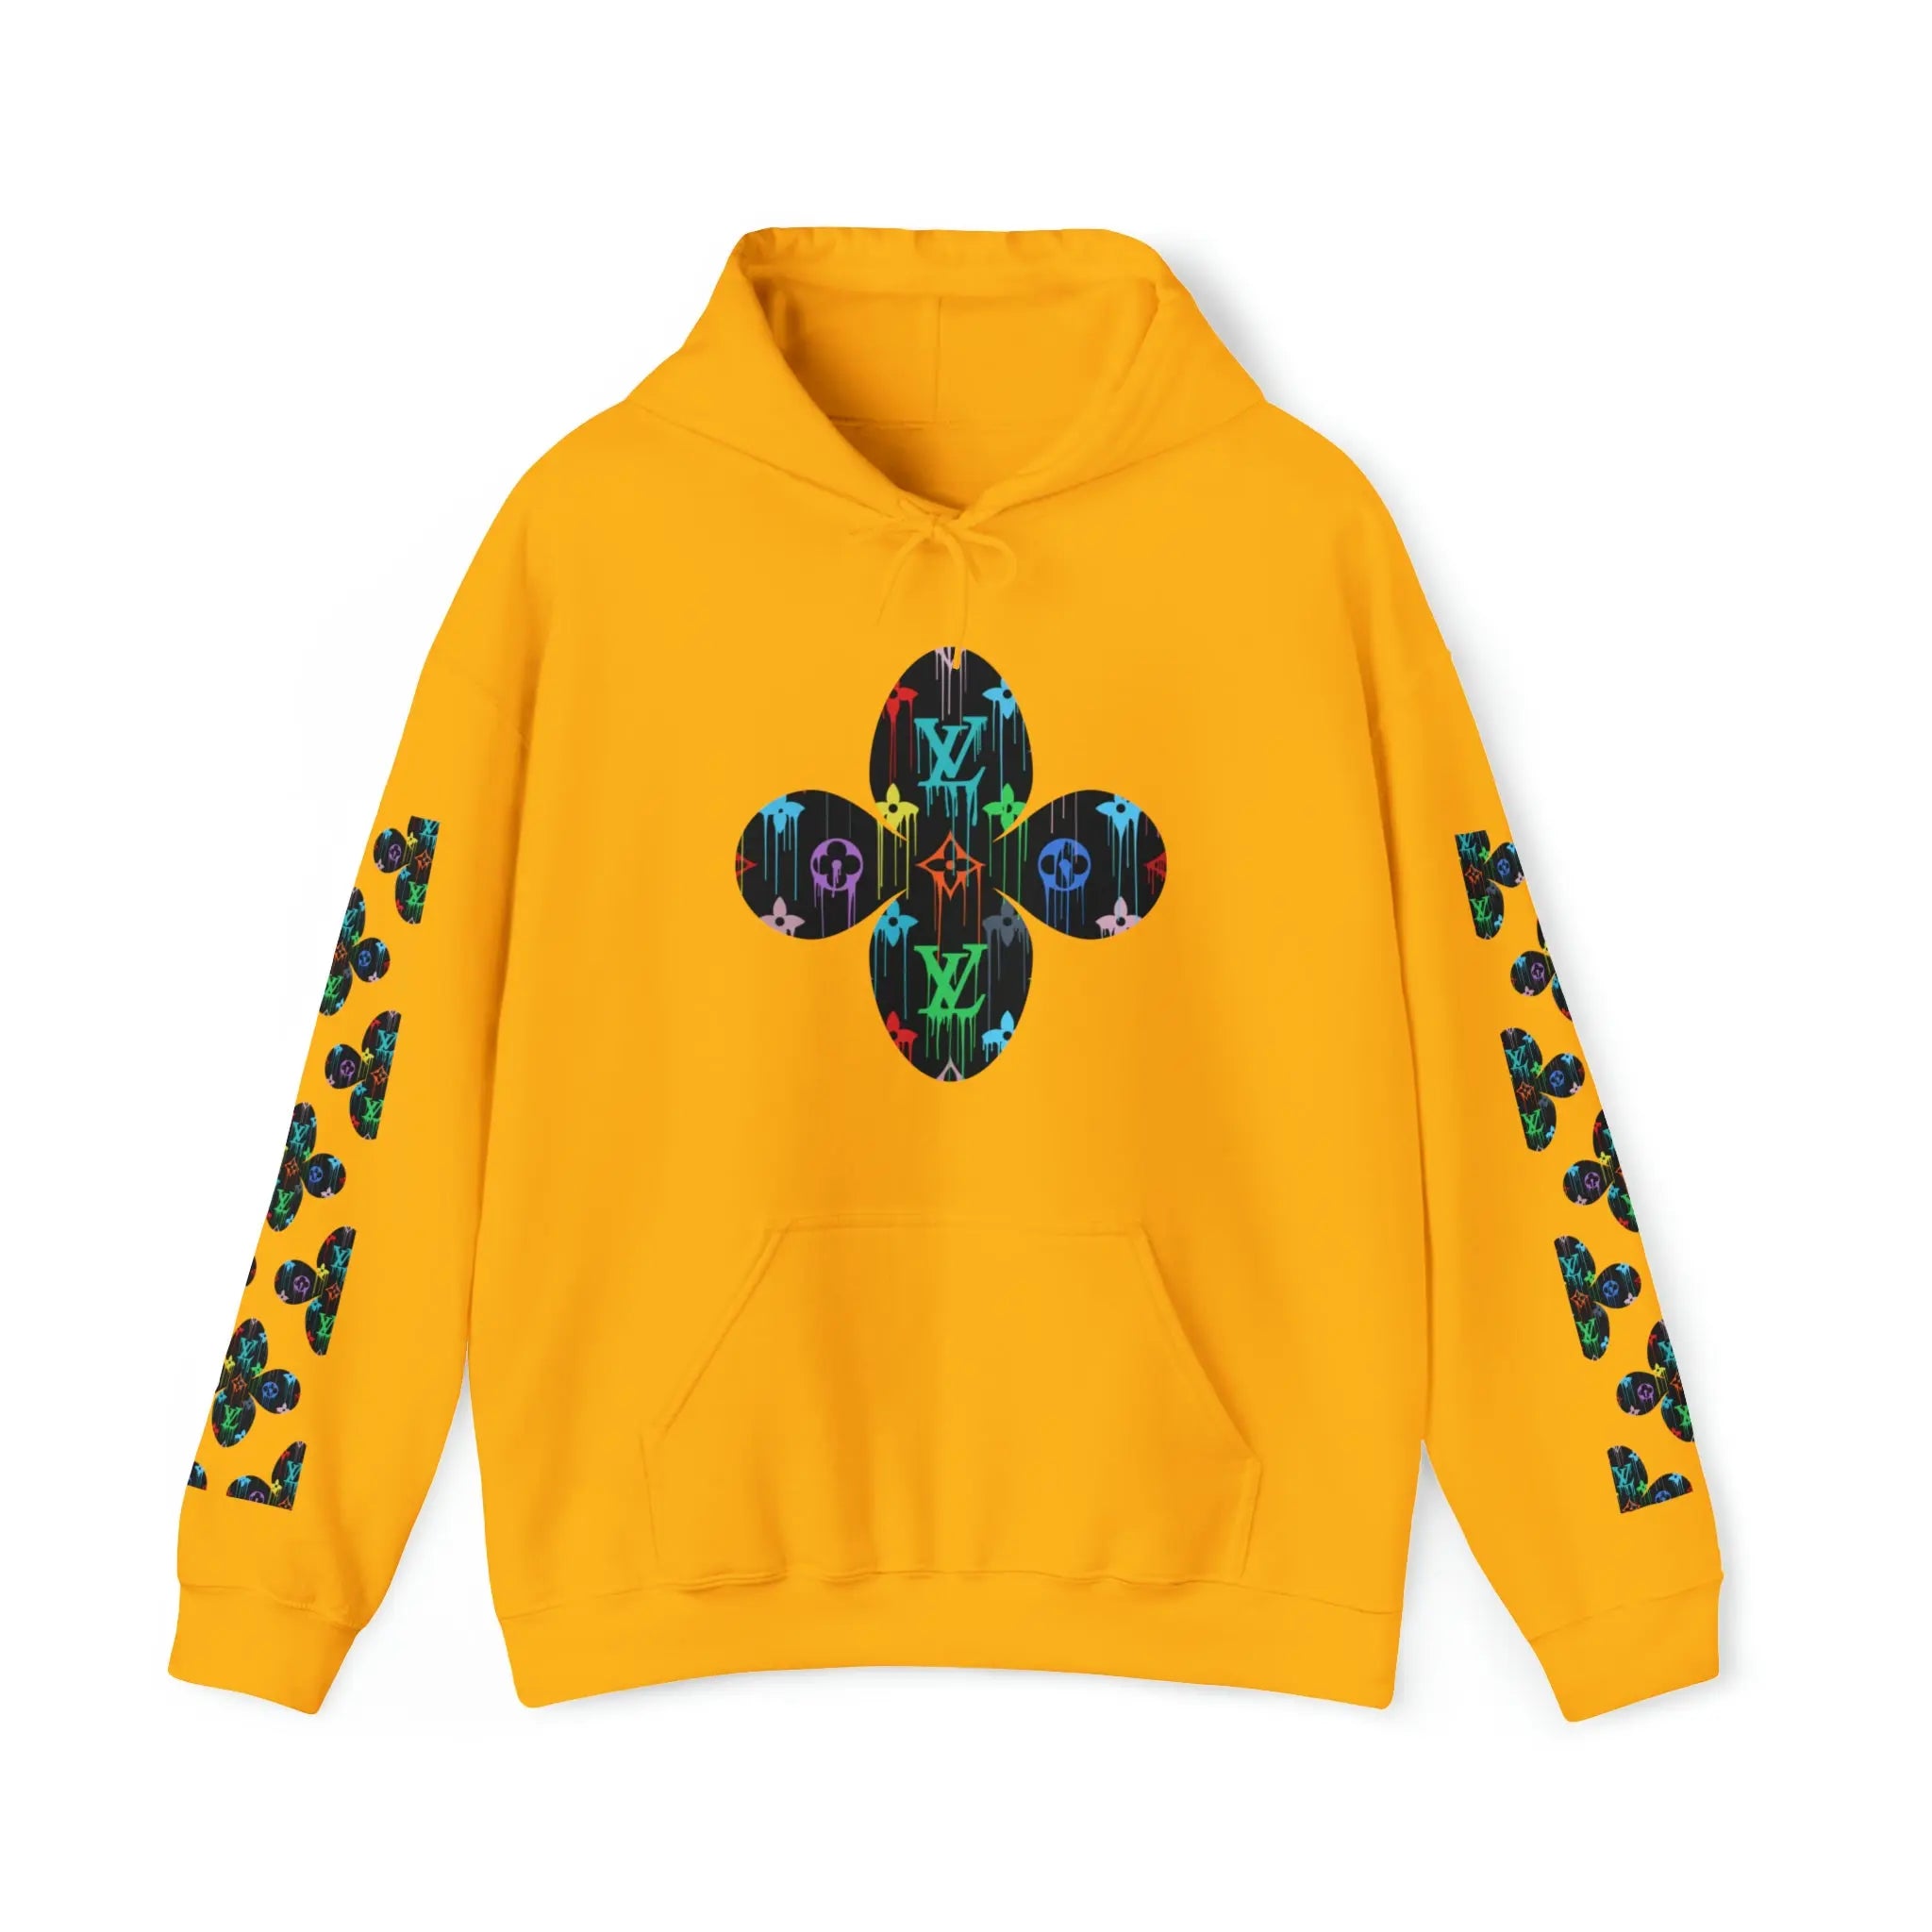  Multi-Colour Dripping Icons Flower with Sleeve Print Unisex Heavy Blend Hooded Sweatshirt HoodieGold5XL